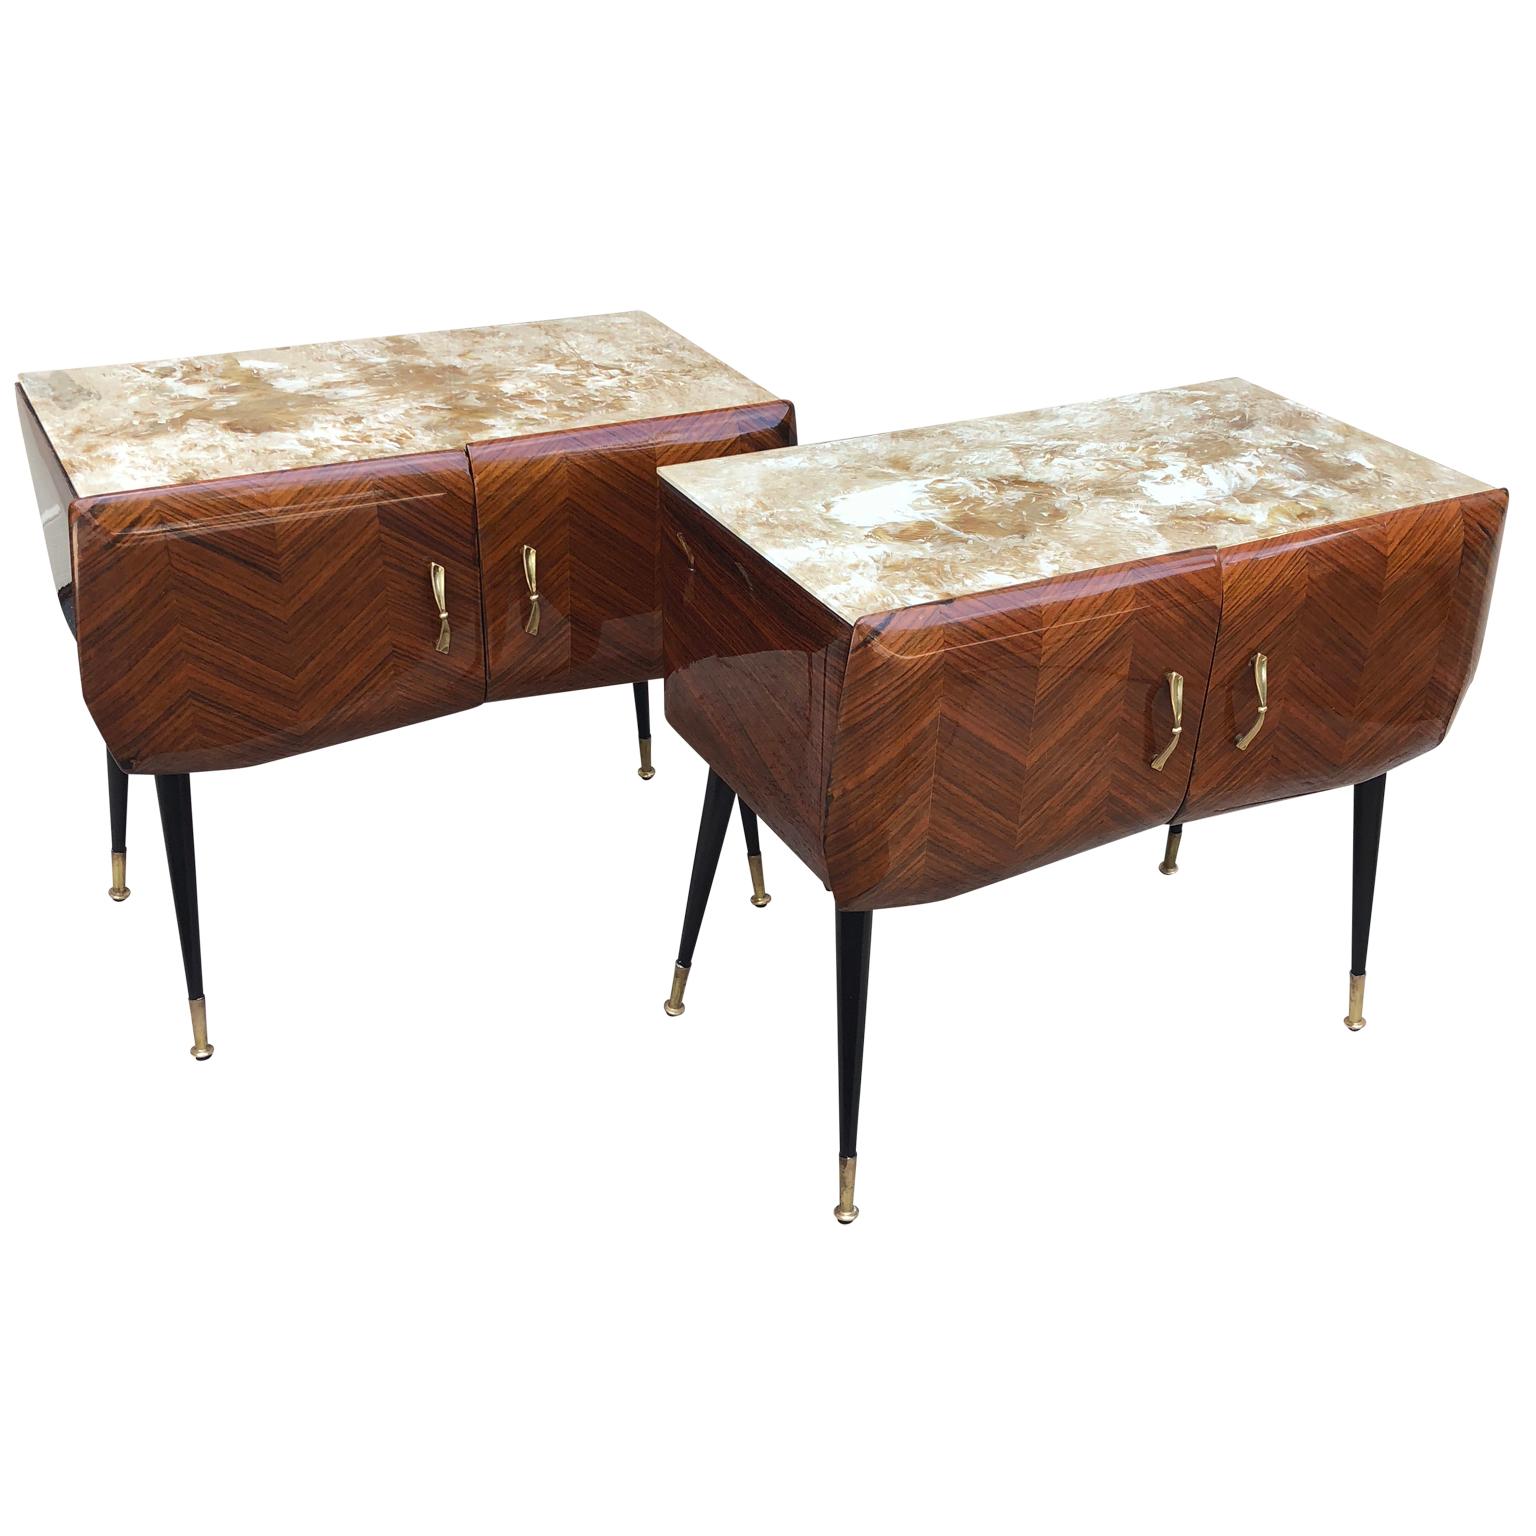 20th Century Pair of Italian Mid-Century Modern Vittorio Dassi Bed Side Tables or Cabinets